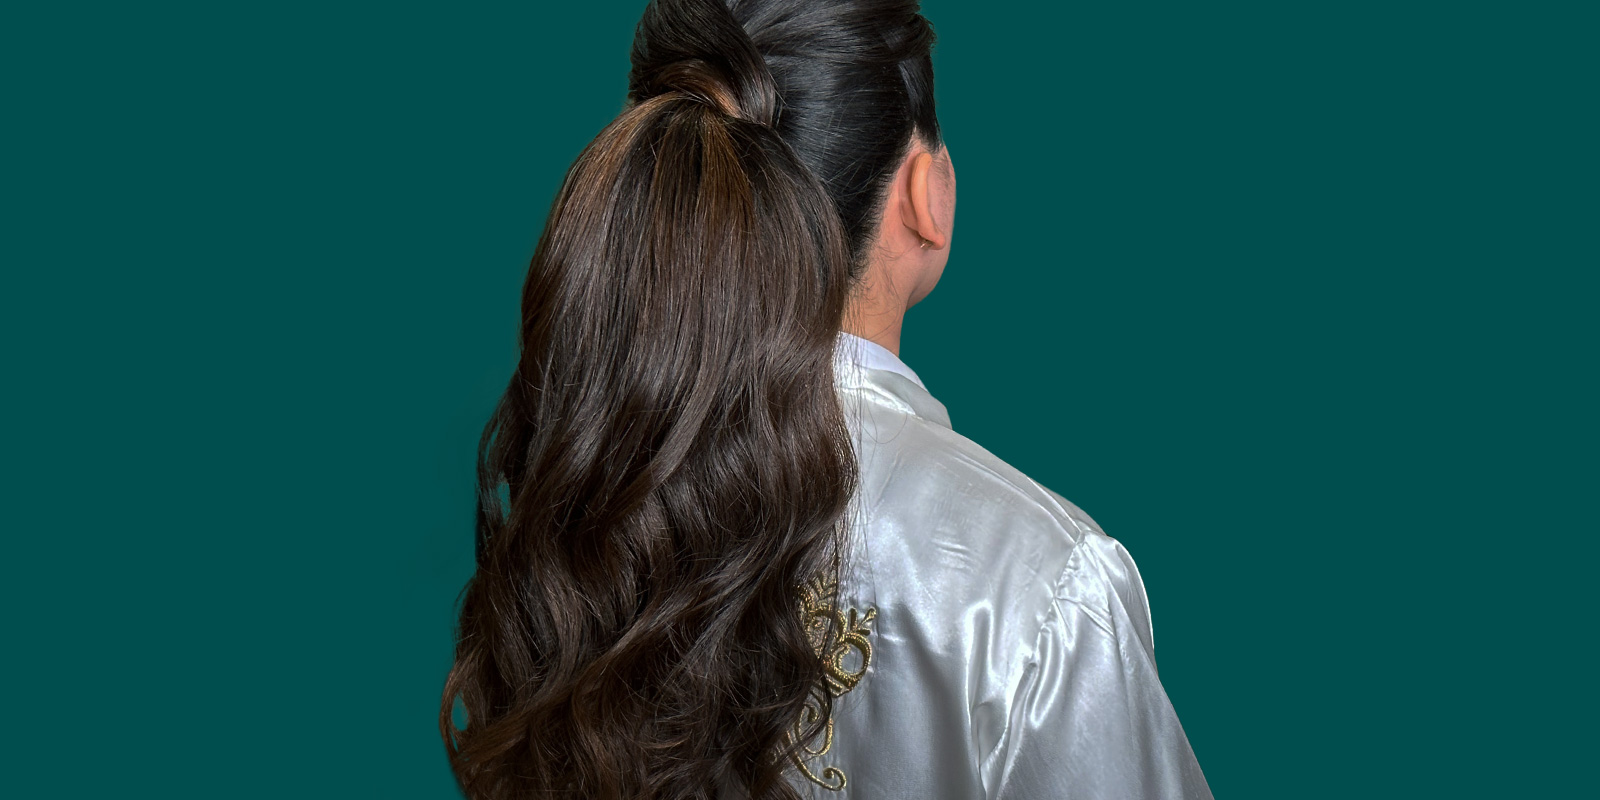 How to Achieve the Ponytail Hairstyle and Maintain It